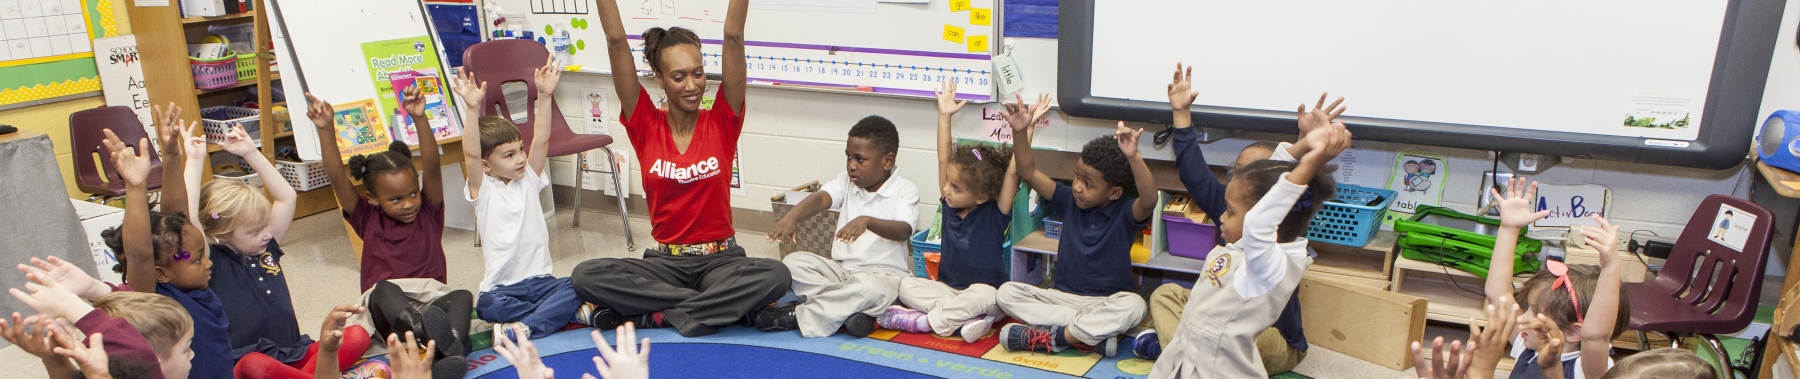 Students in a classroom raising their hands 